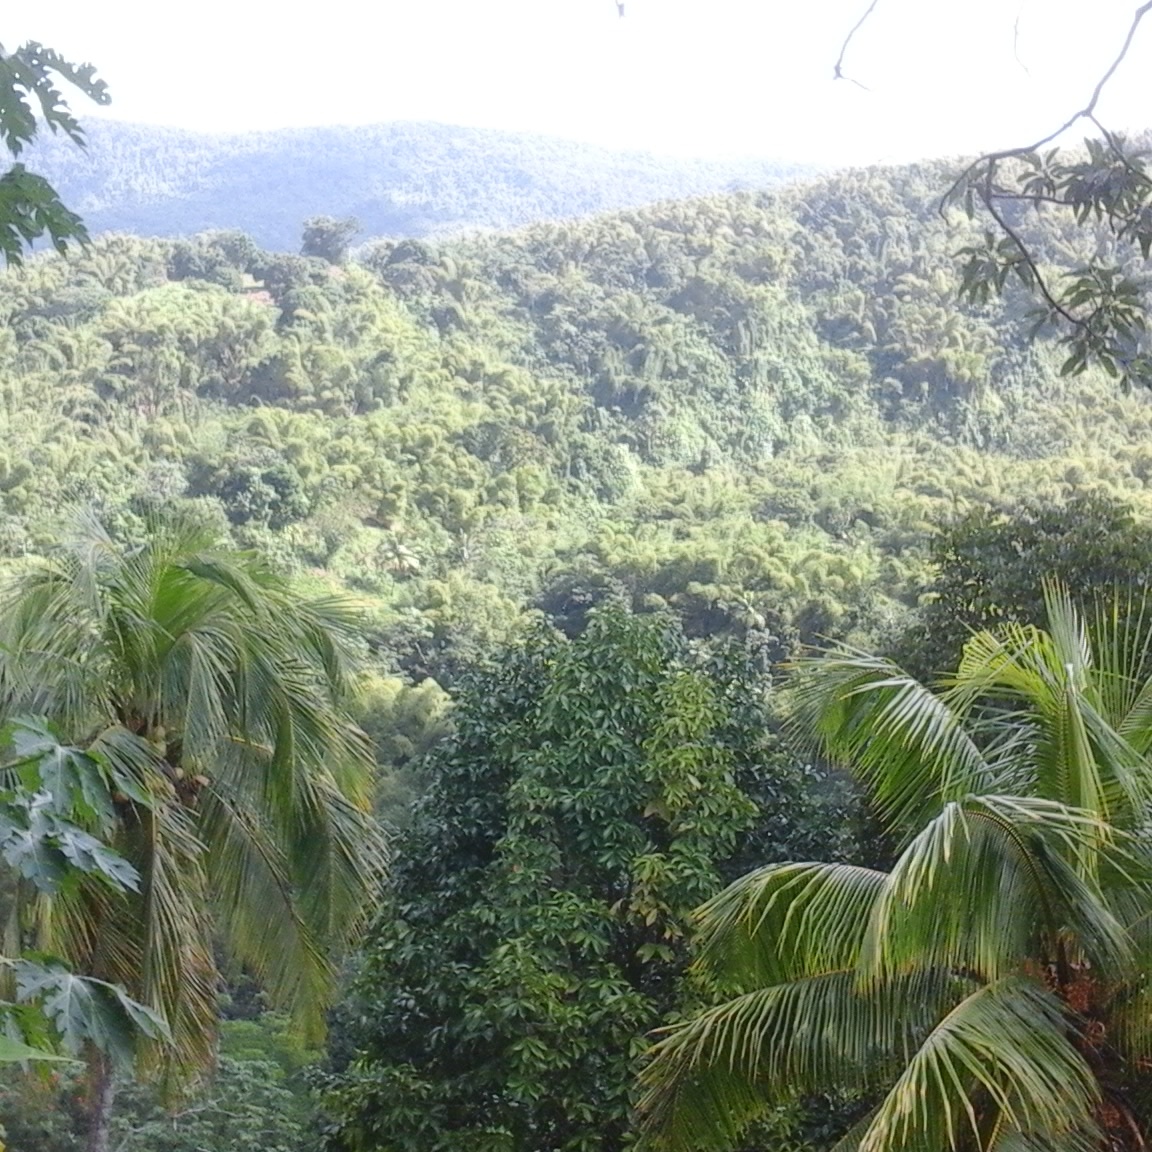 View of a hill from Portland, Jamaica